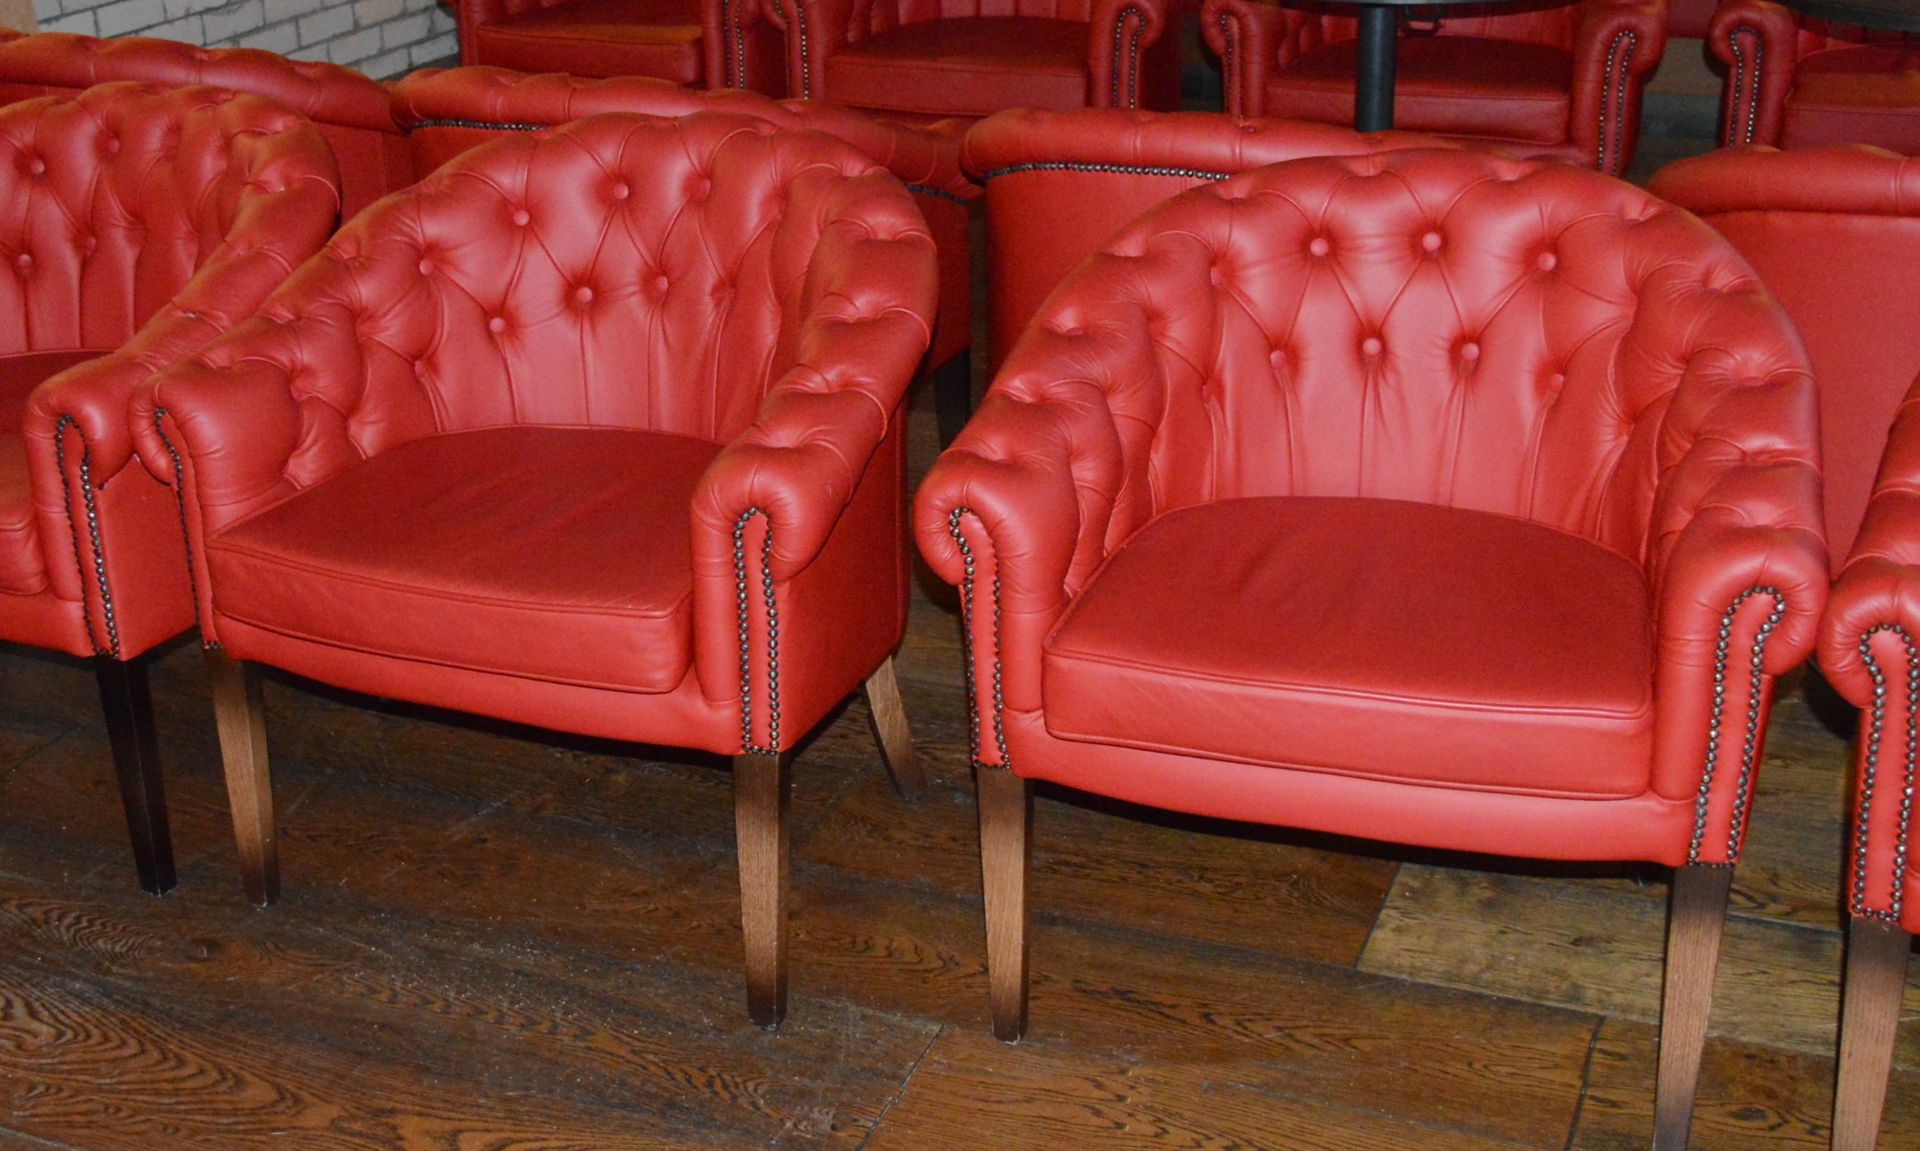 2 x Chesterfield Style Buttoned Back Red Leather Tub Chairs With Hardwood Legs Finished in an